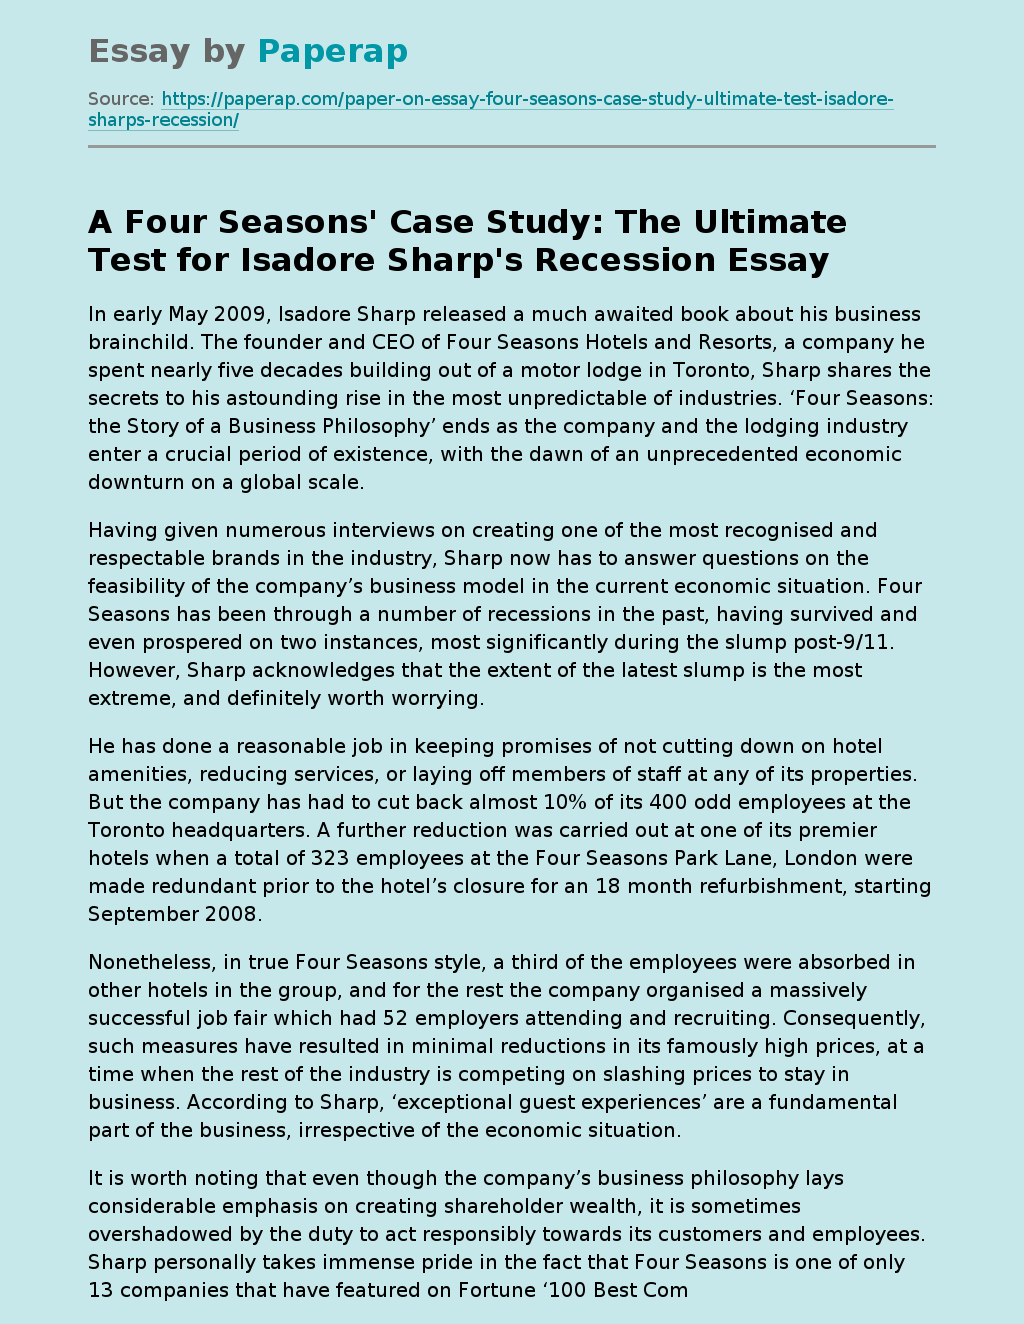 A Four Seasons' Case Study: The Ultimate Test for Isadore Sharp's Recession